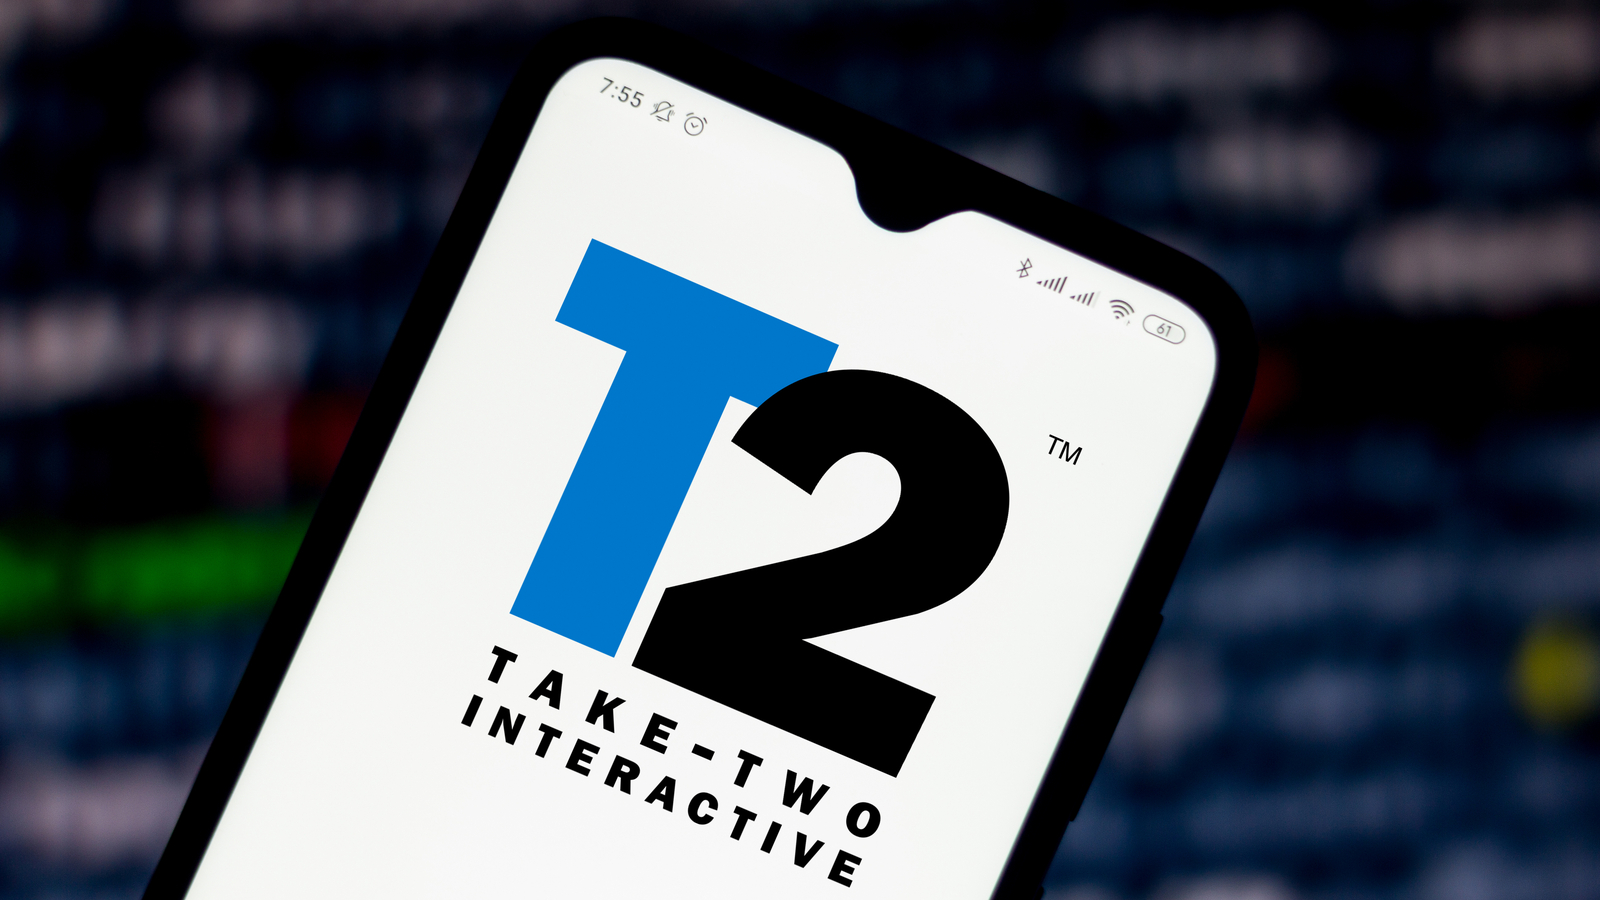 Take-Two Interactive (TTWO) logo displayed on a smartphone